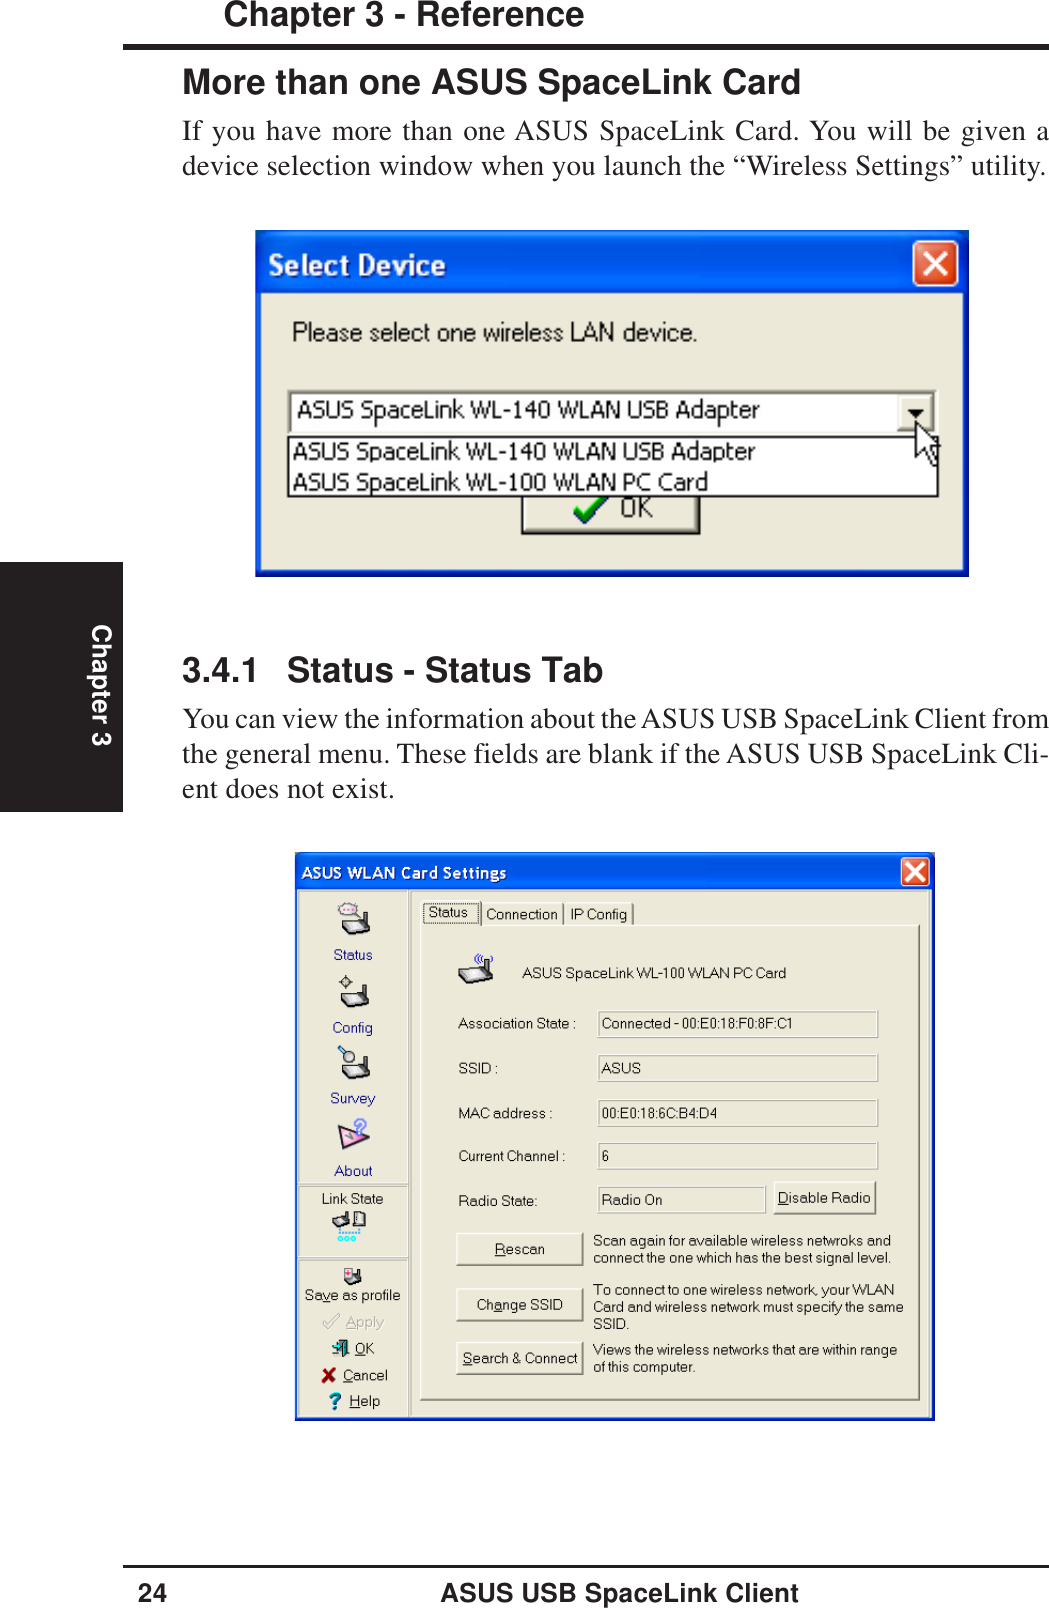 24 ASUS USB SpaceLink ClientChapter 3 - ReferenceChapter 33.4.1 Status - Status TabYou can view the information about the ASUS USB SpaceLink Client fromthe general menu. These fields are blank if the ASUS USB SpaceLink Cli-ent does not exist.More than one ASUS SpaceLink CardIf you have more than one ASUS SpaceLink Card. You will be given adevice selection window when you launch the “Wireless Settings” utility.